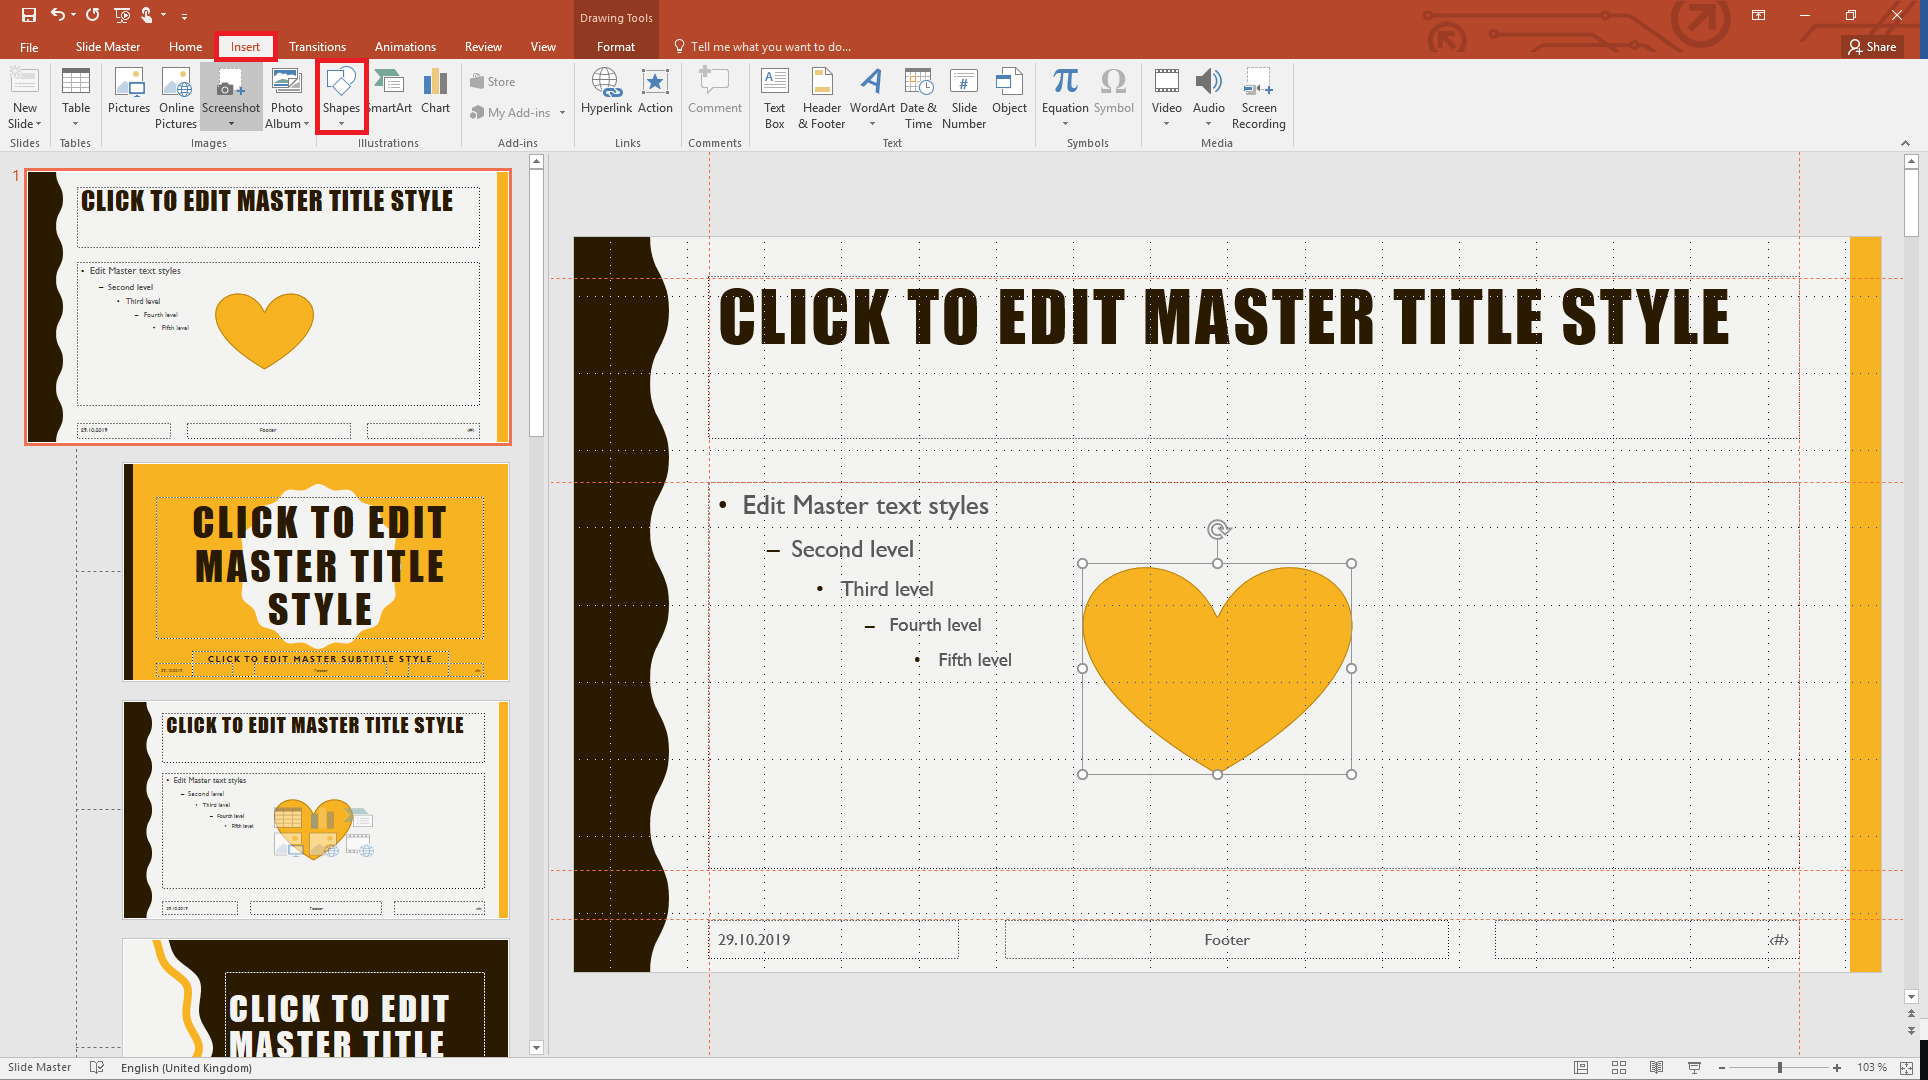 How to Make a Heart in PowerPoint